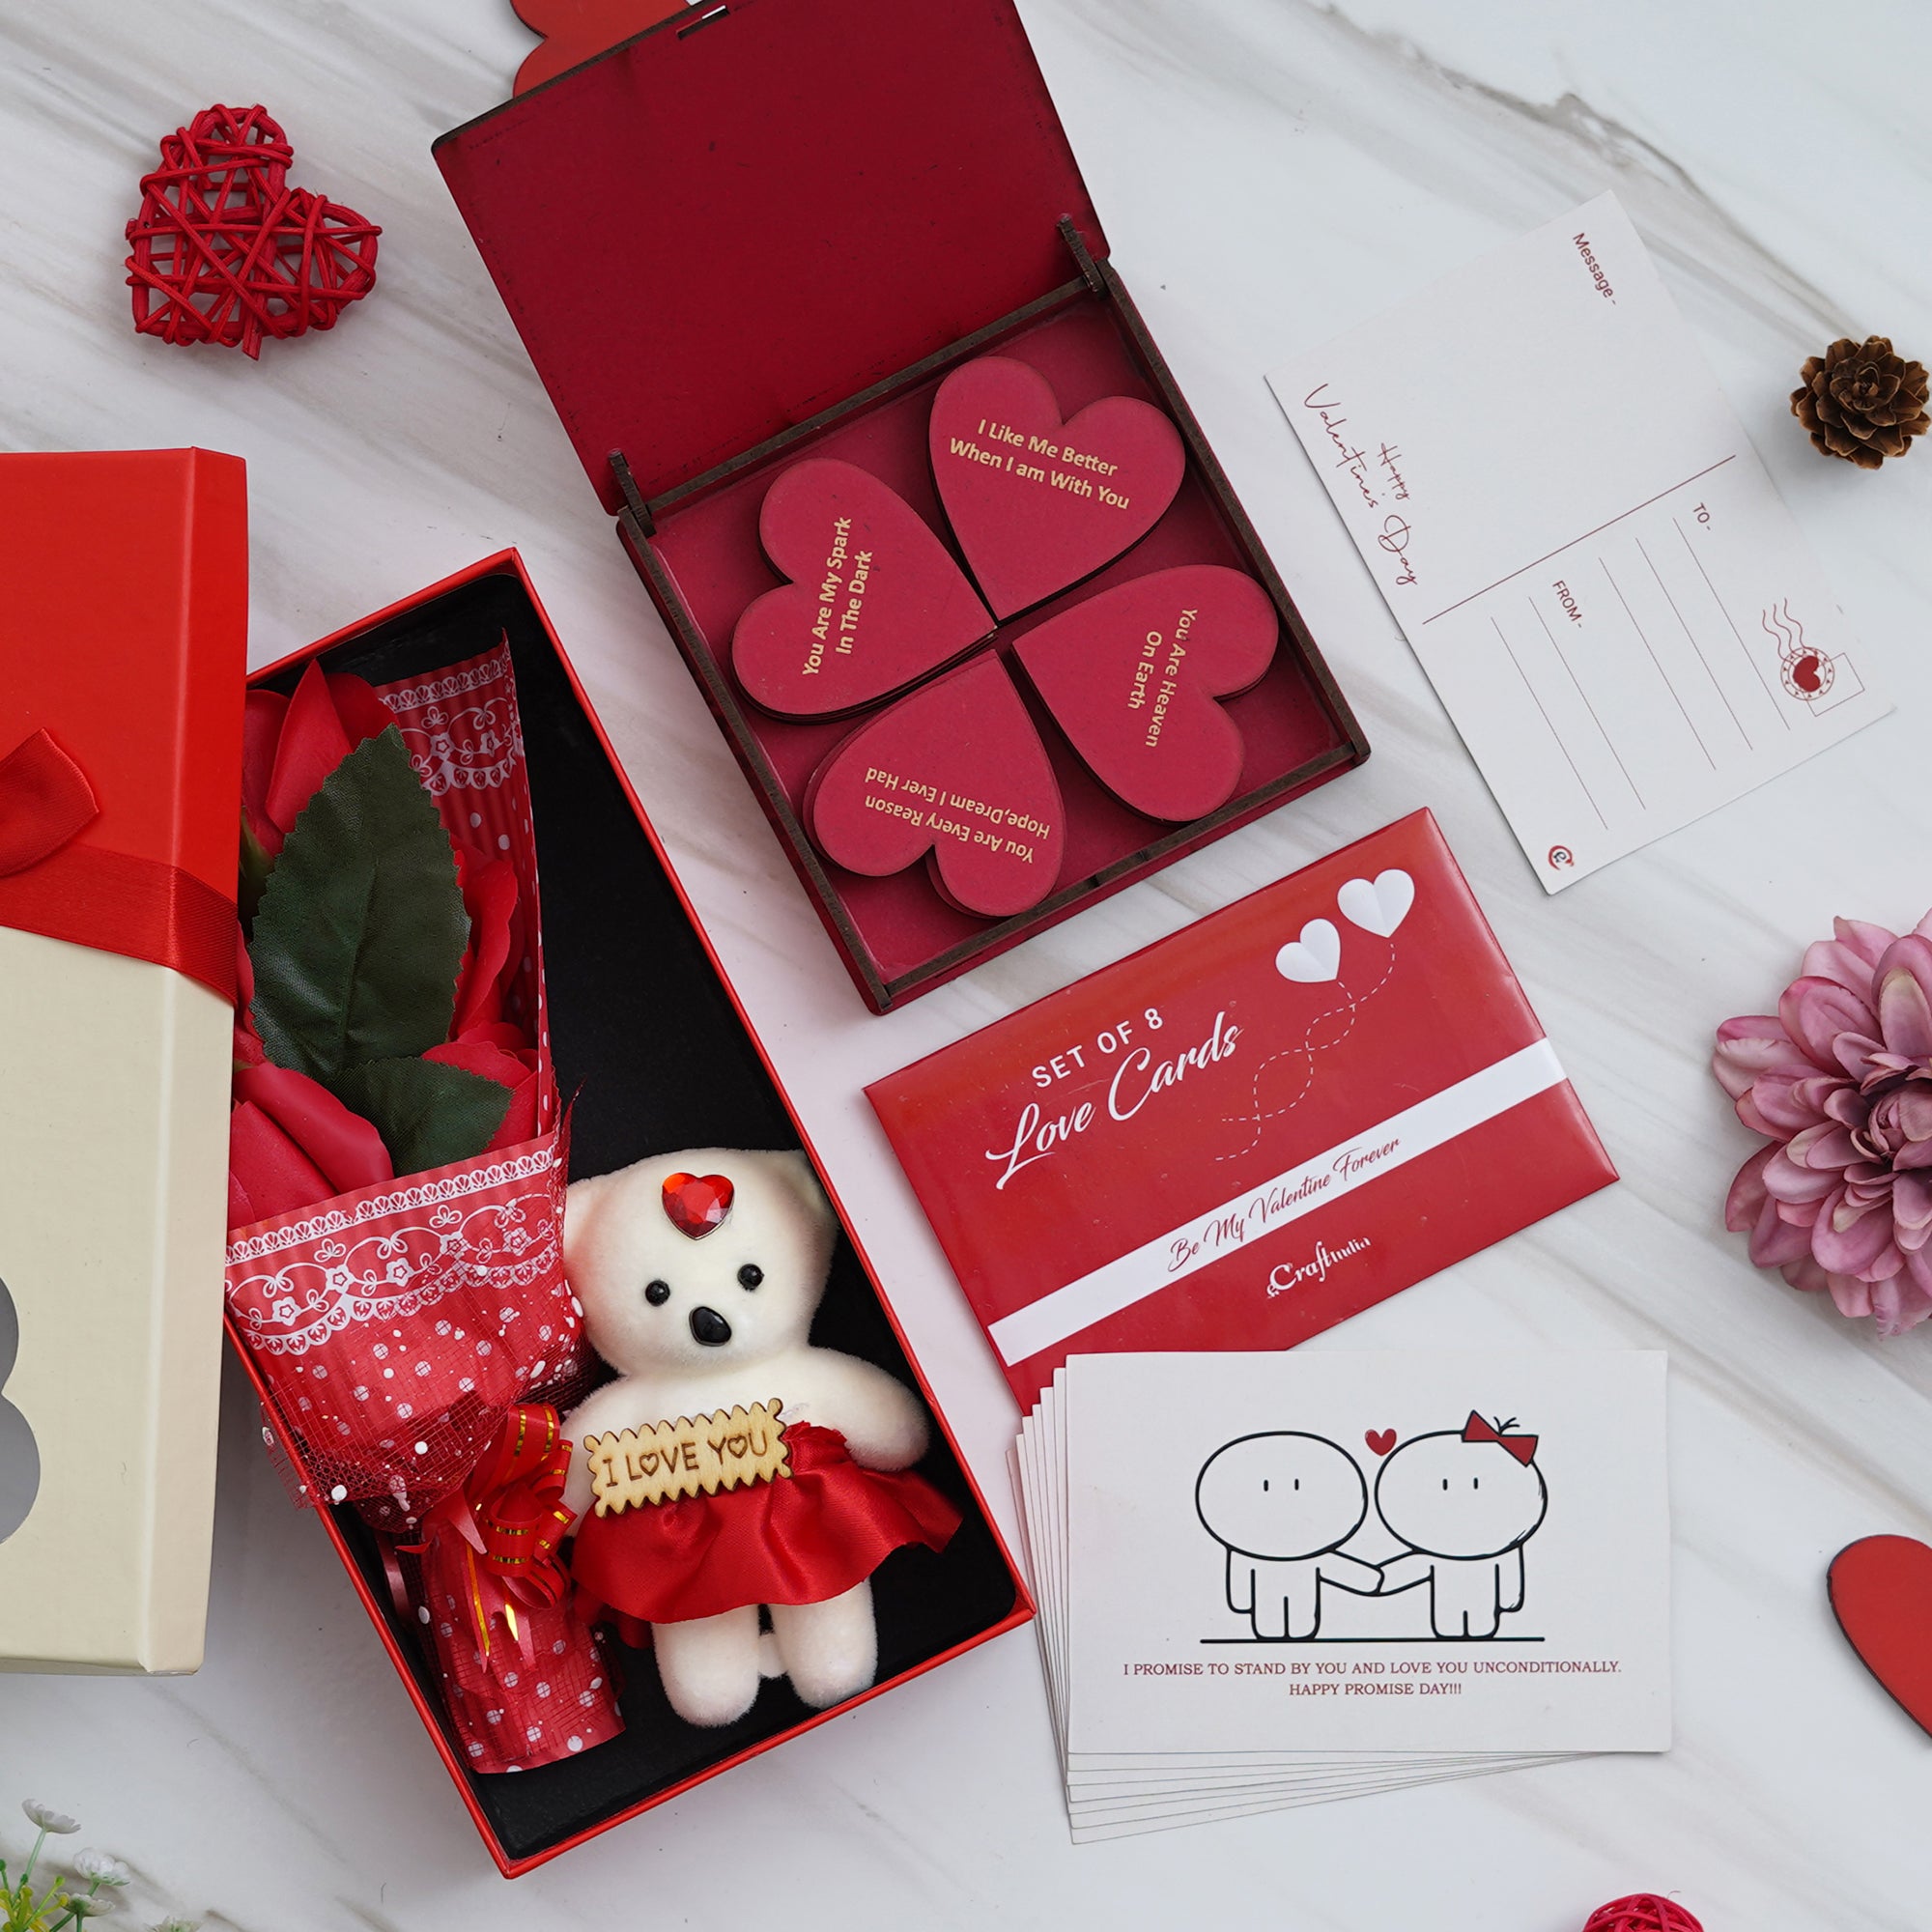 Valentine Combo of Set of 8 Love Post Cards Gift Cards Set, "20 Reasons Why I Love You" Printed on Little Red Hearts Decorative Wooden Gift Set Box, Red Roses Bouquet and White, Red Teddy Bear Valentine's Rectangle Shaped Gift Box